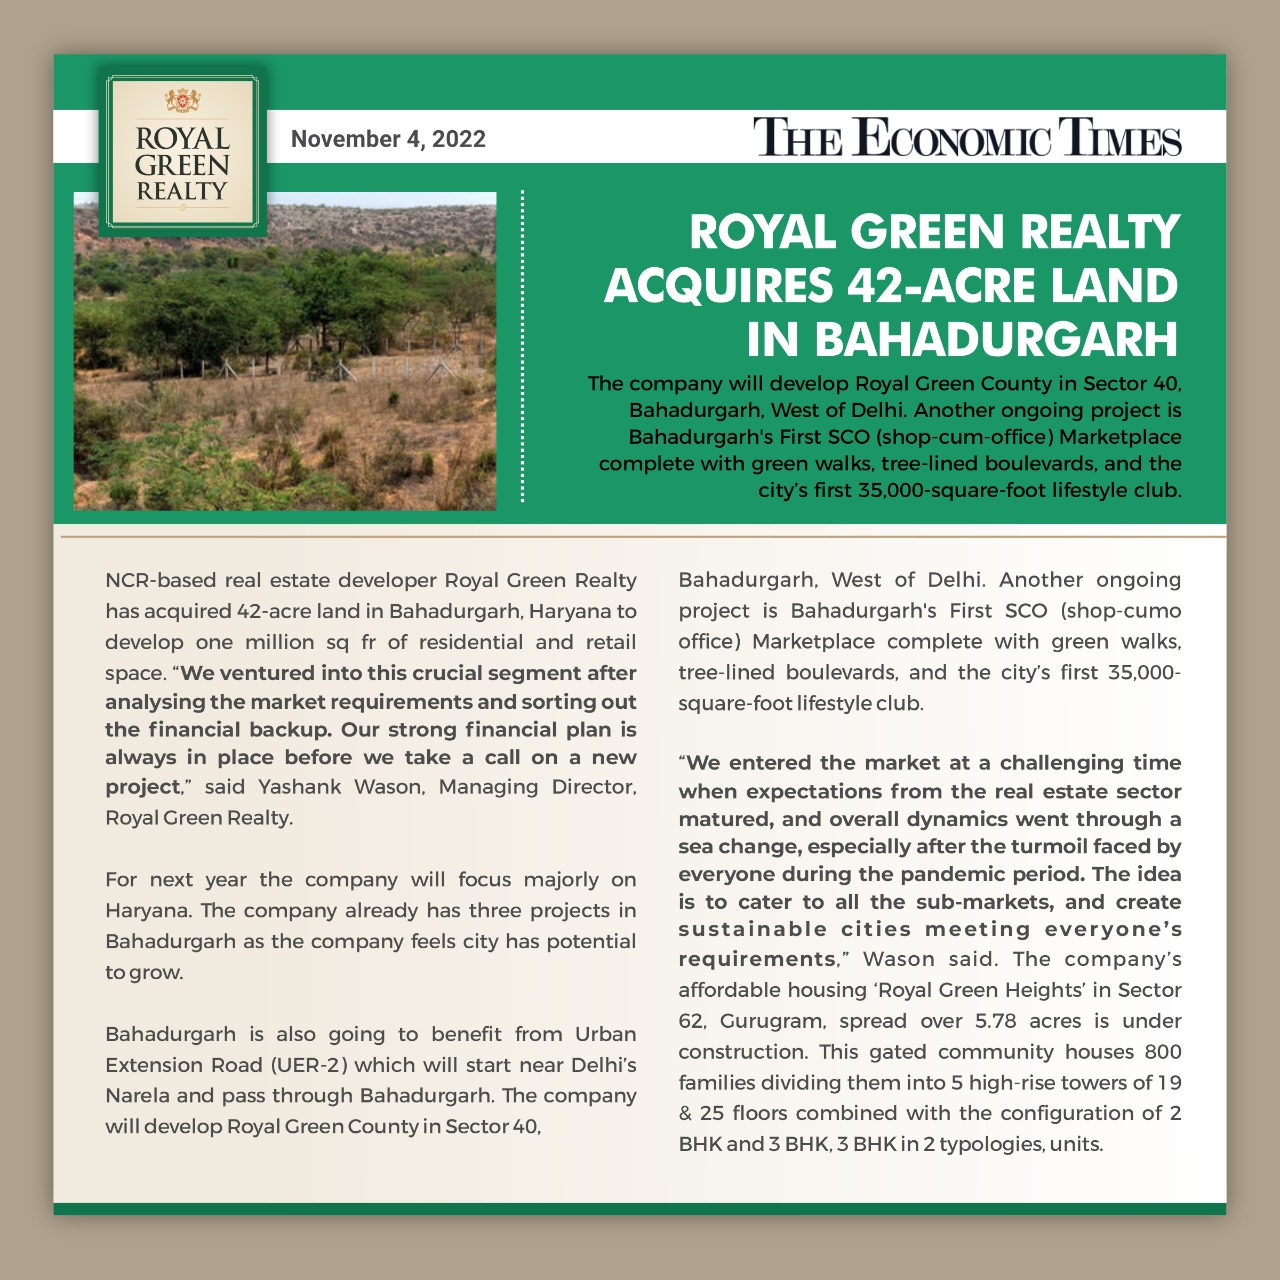 Royal Green Realty Acquires 42-Acre Land in BahadurGarh